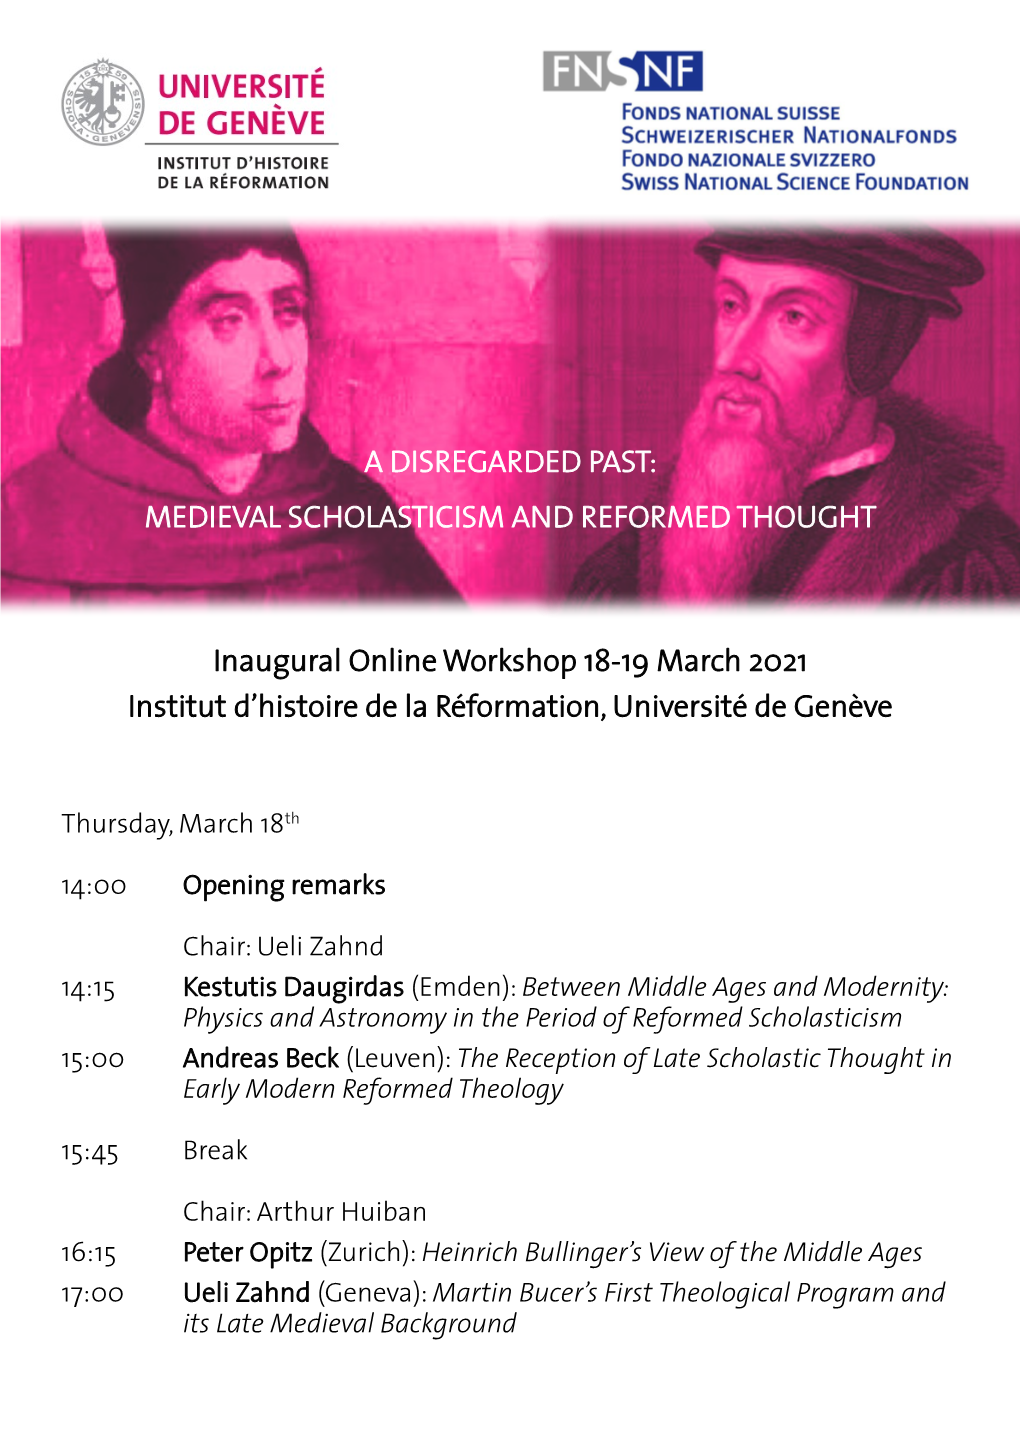 A Disregarded Past: Medieval Scholasticism and Reformed Thought